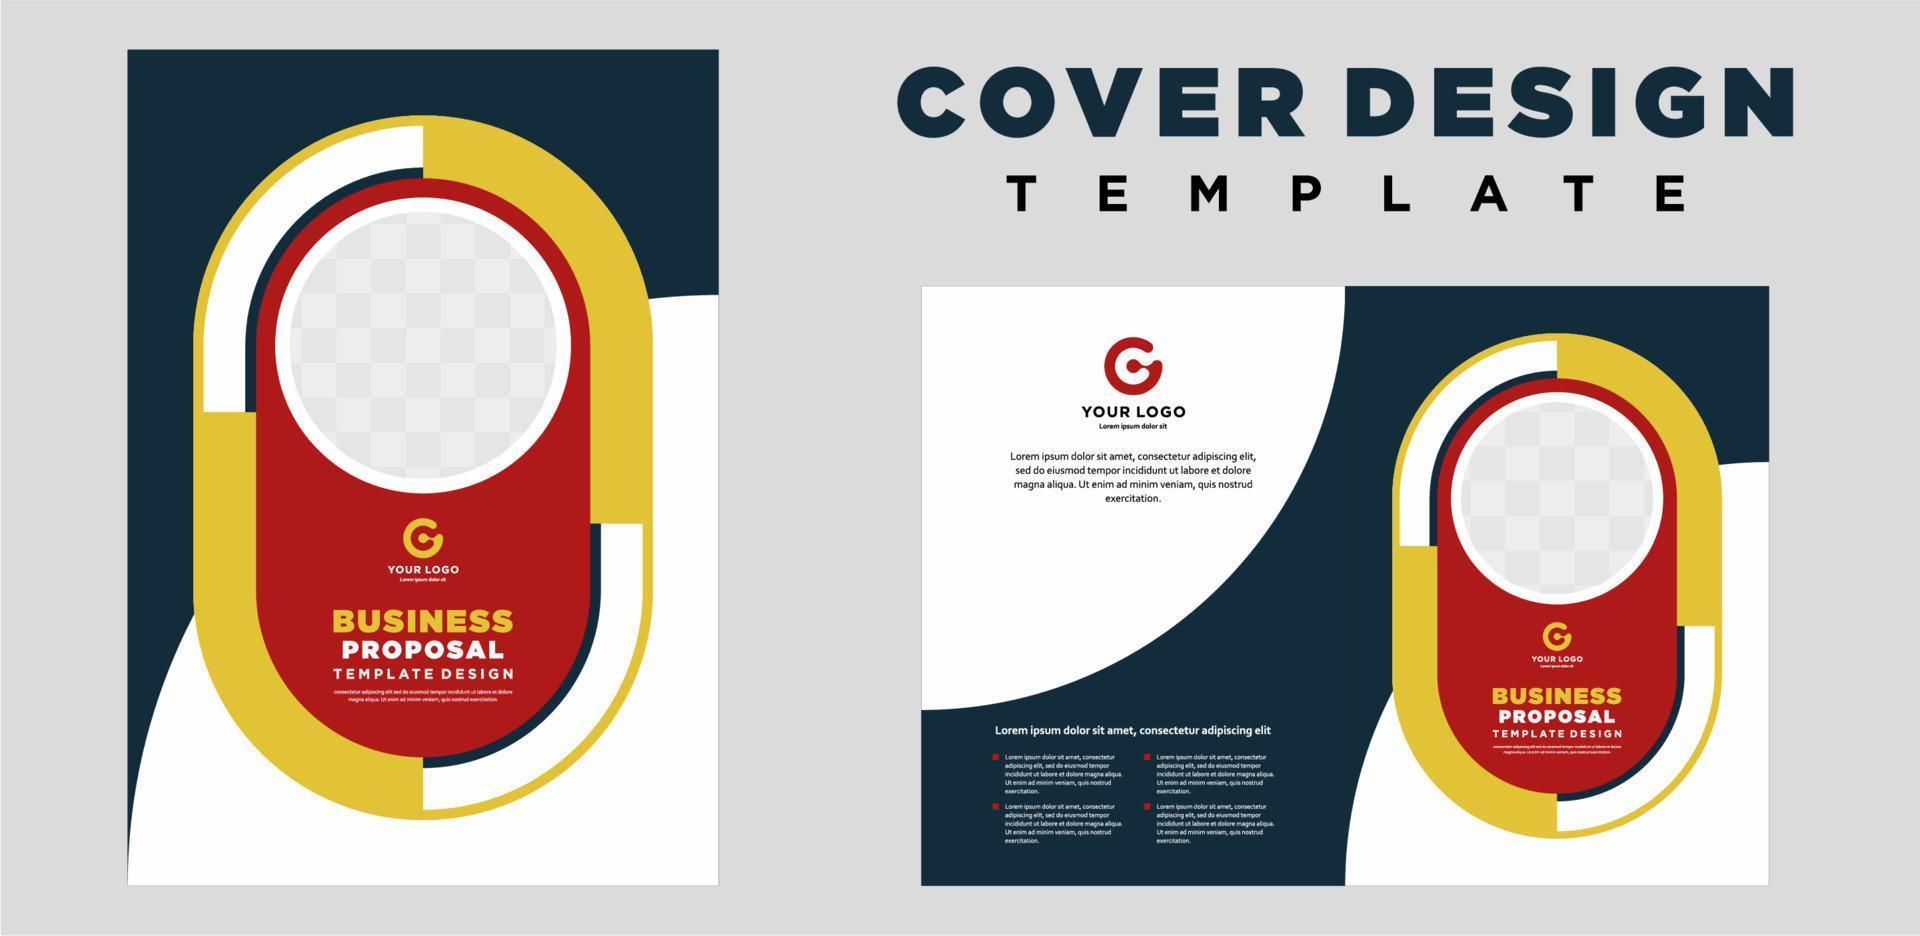 company profile cover template layout design or brochure cover template design vector